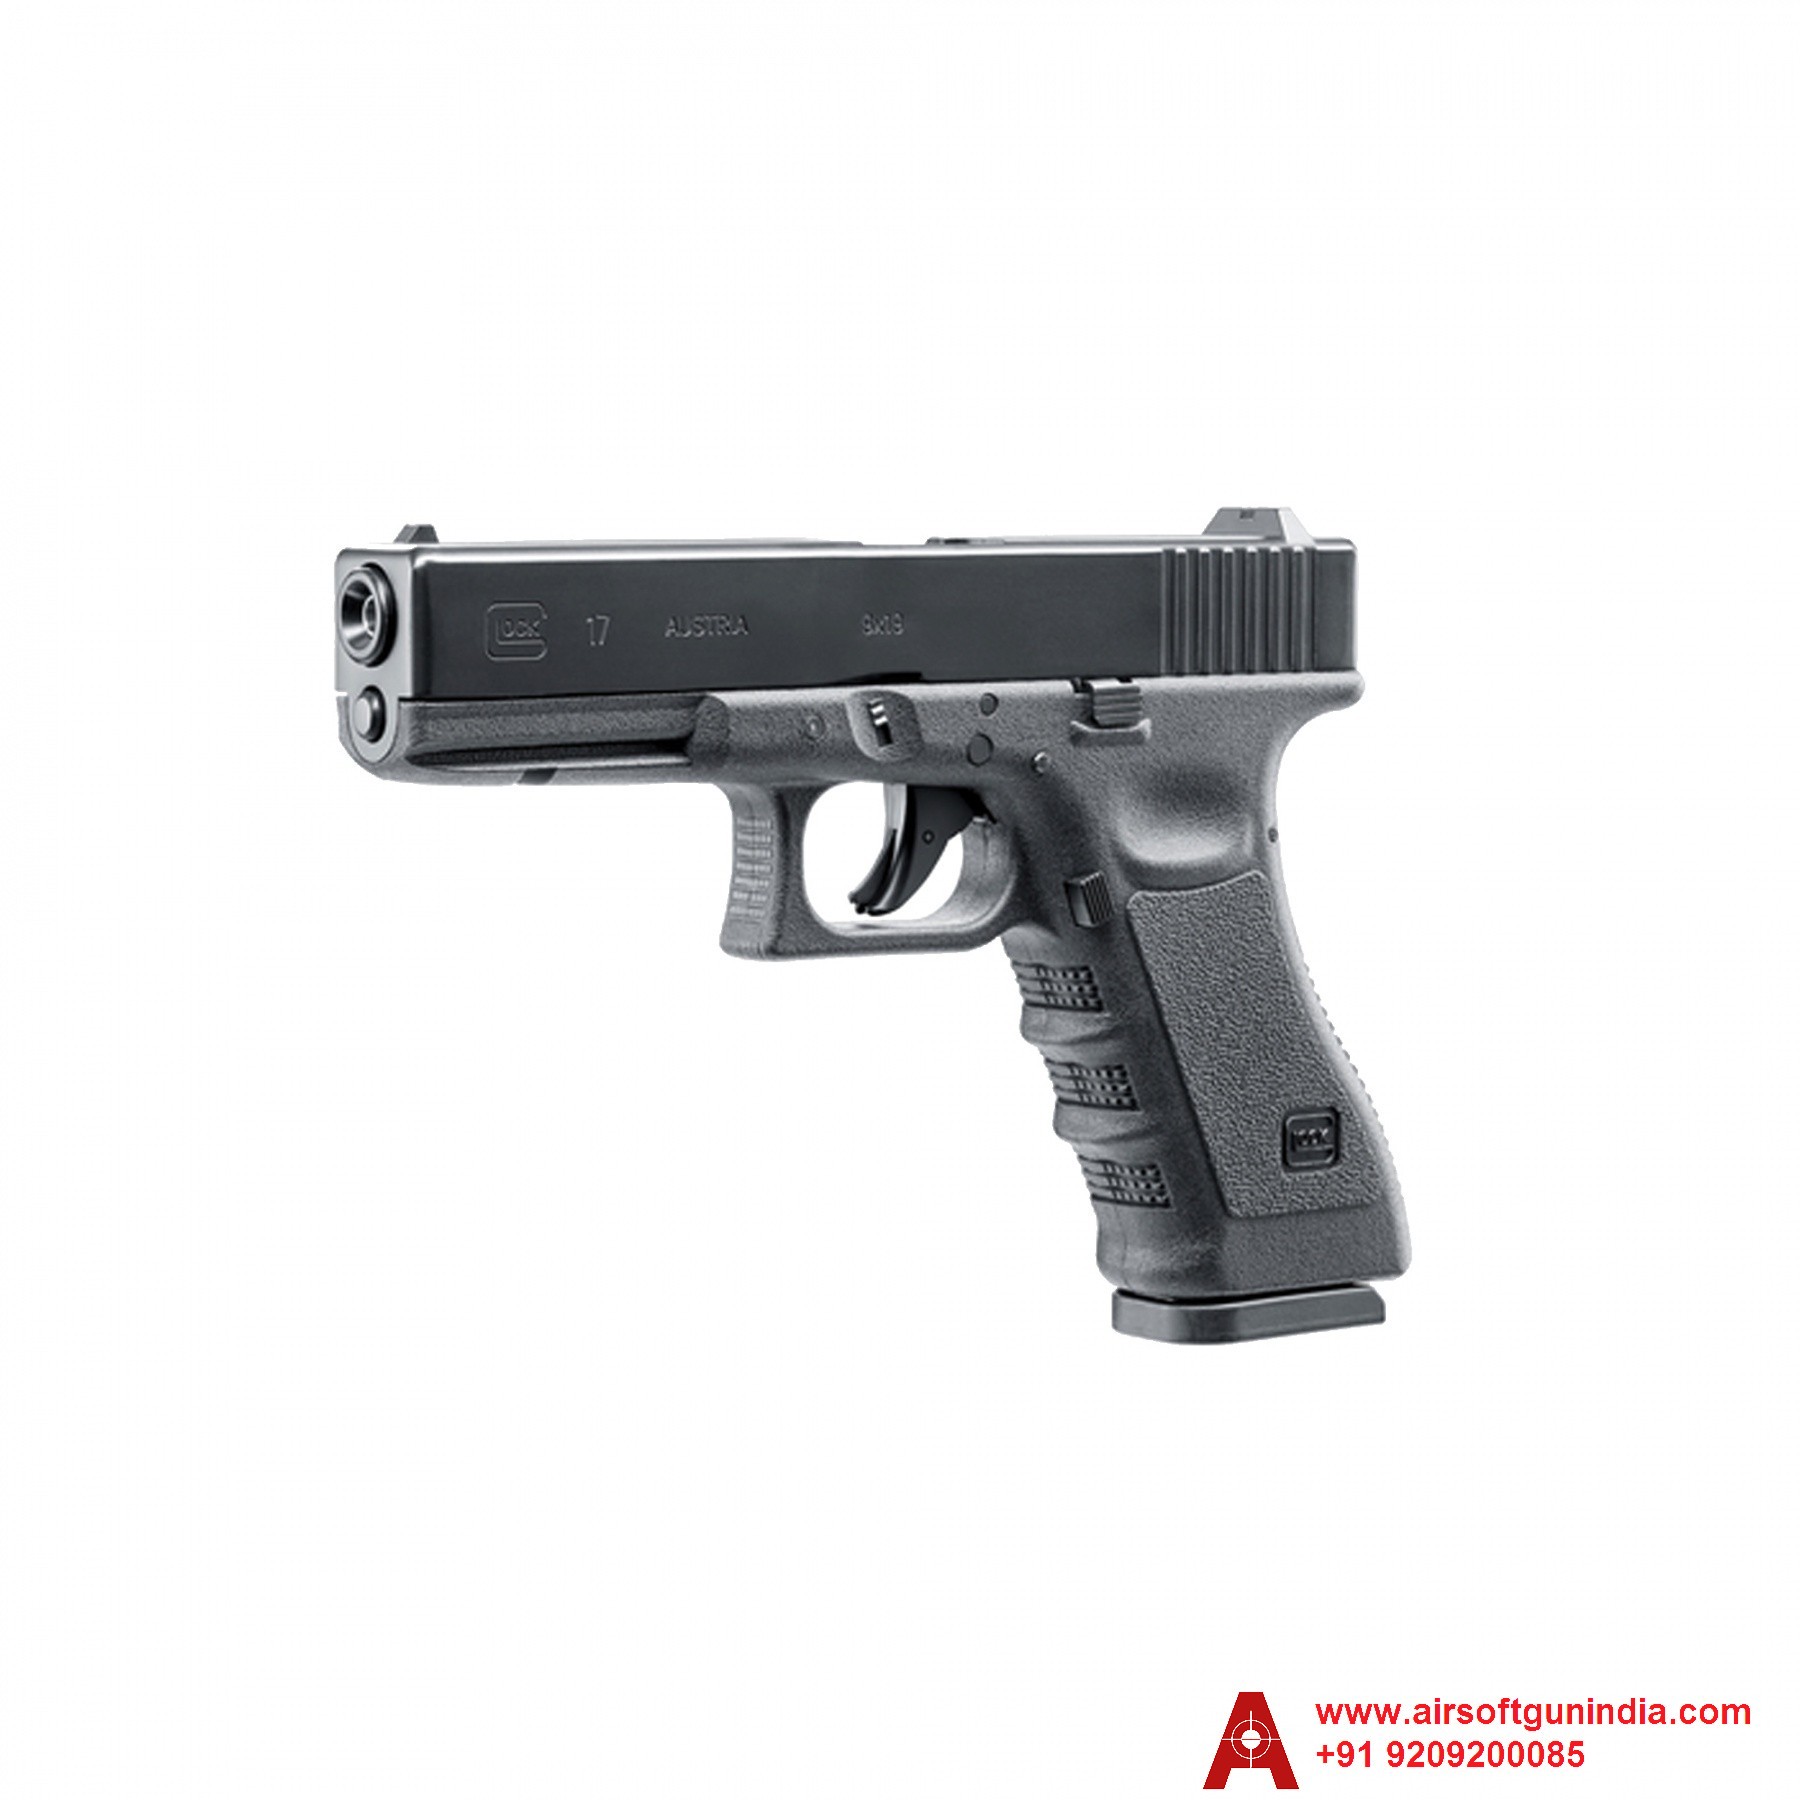 Glock 17 Gen3 Cal .177 CO2 Bb And Pellet Pistol By Airsoft Gun India